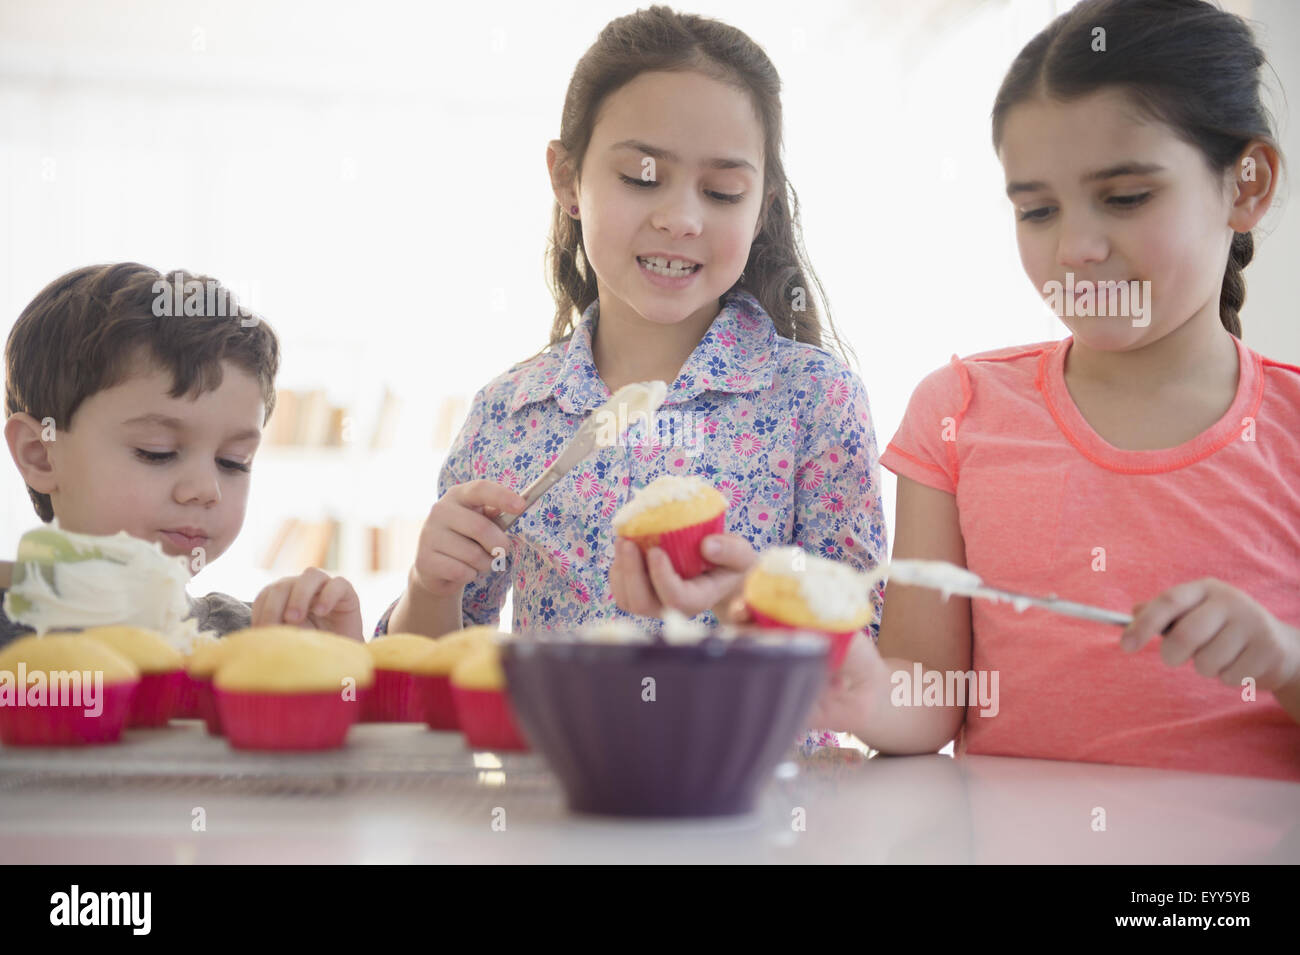 Caucasian siblings spreading frosting on cupcakes Stock Photo